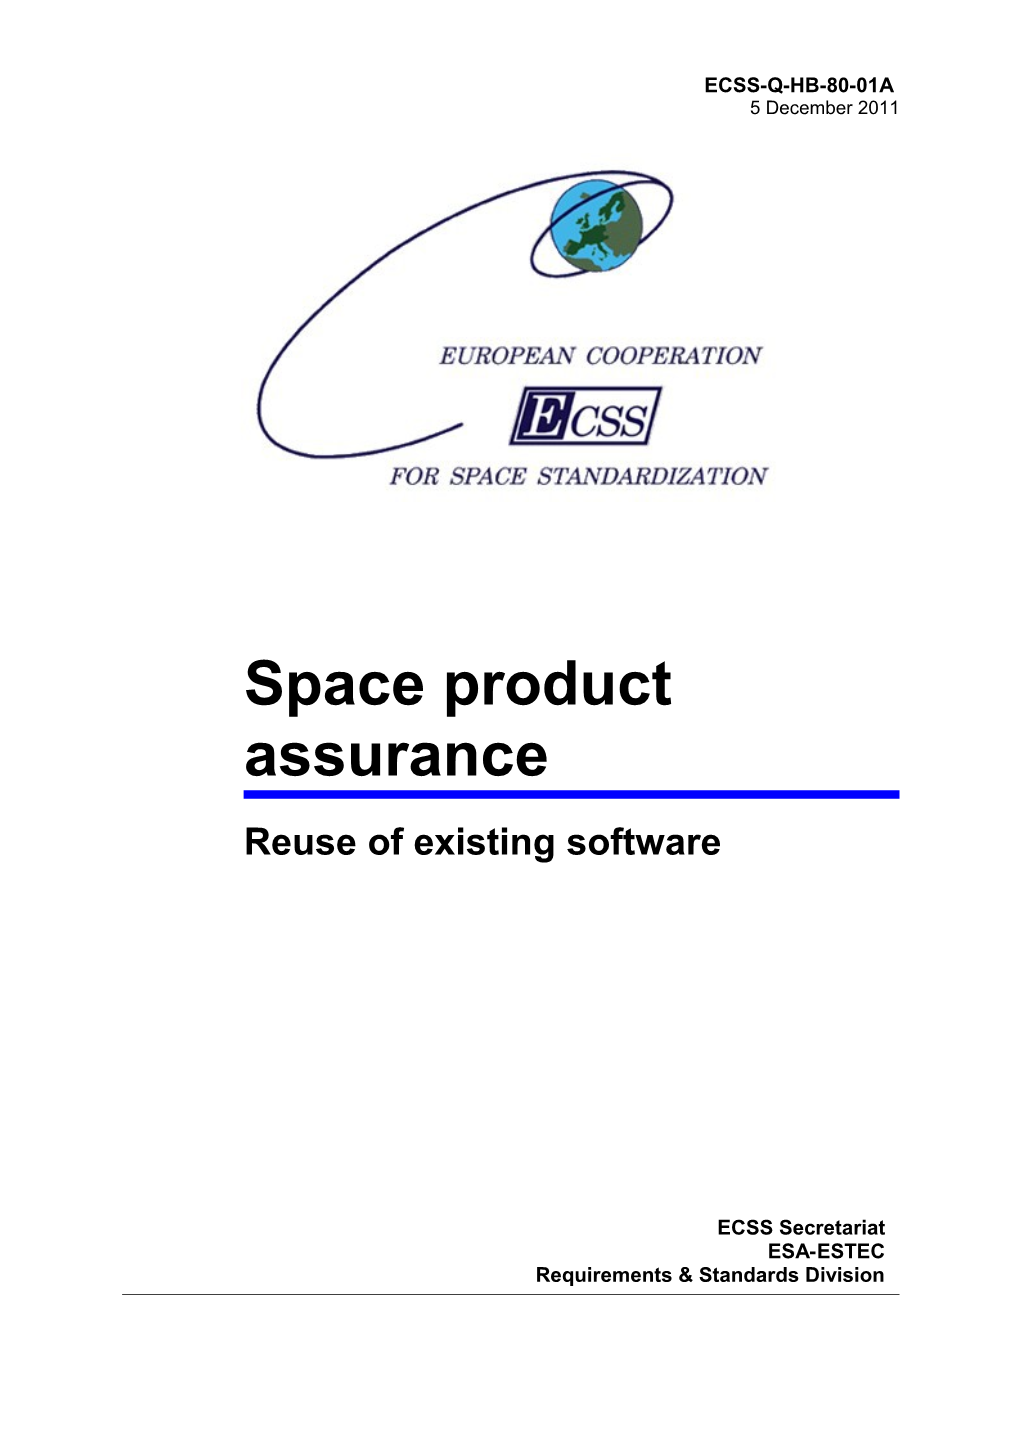 Reuse of Existing Software